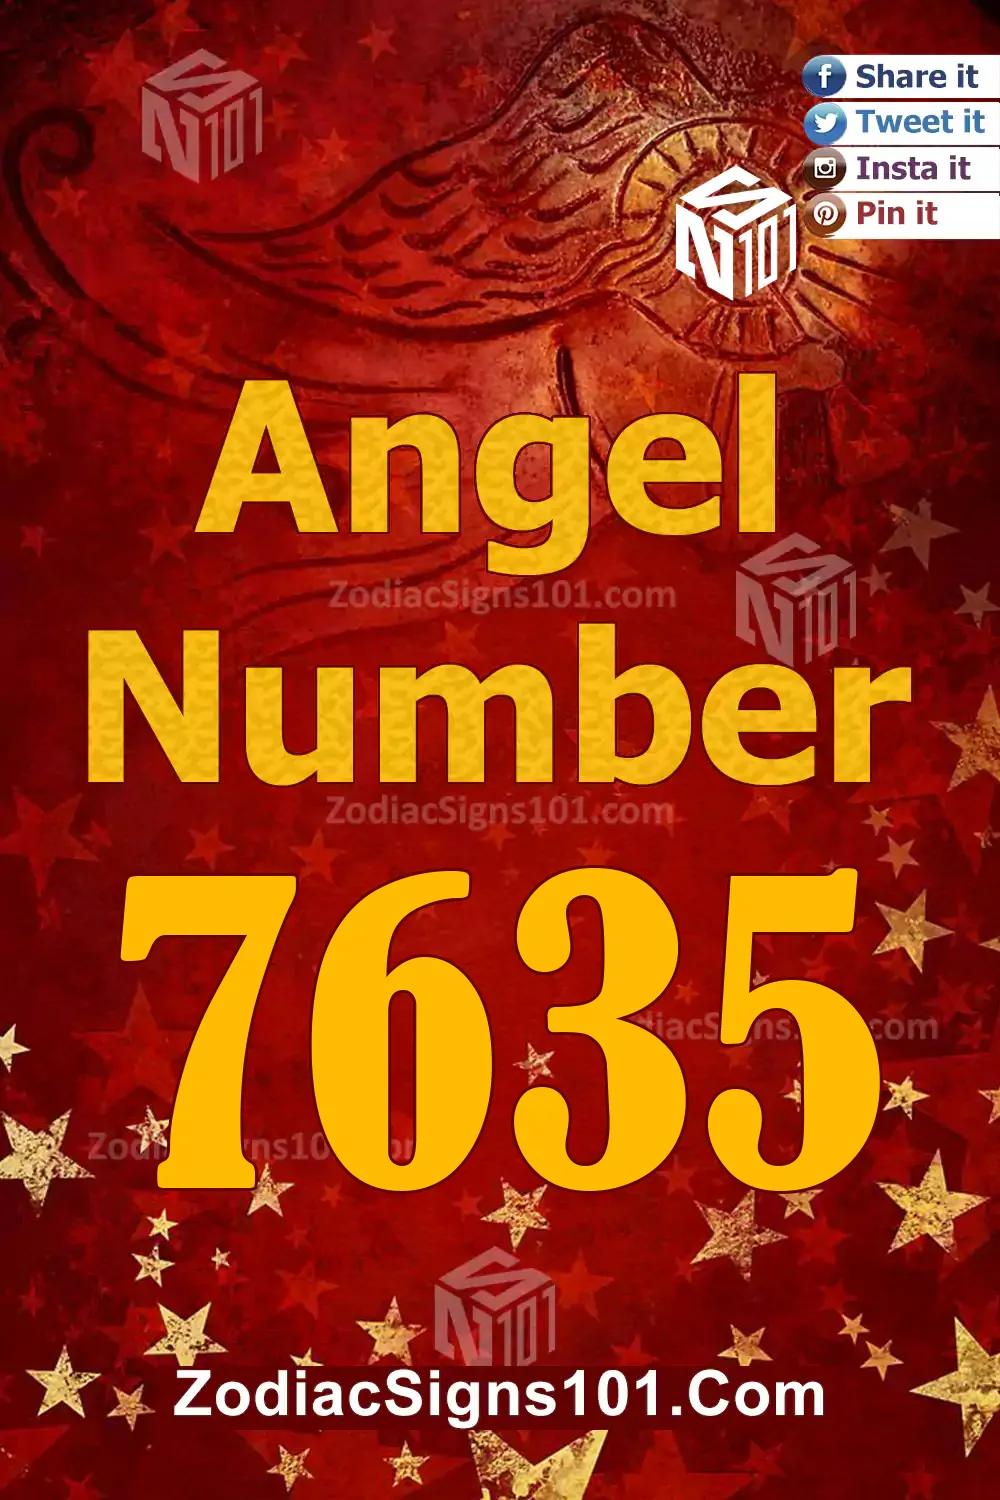 7635 Angel Number Meaning